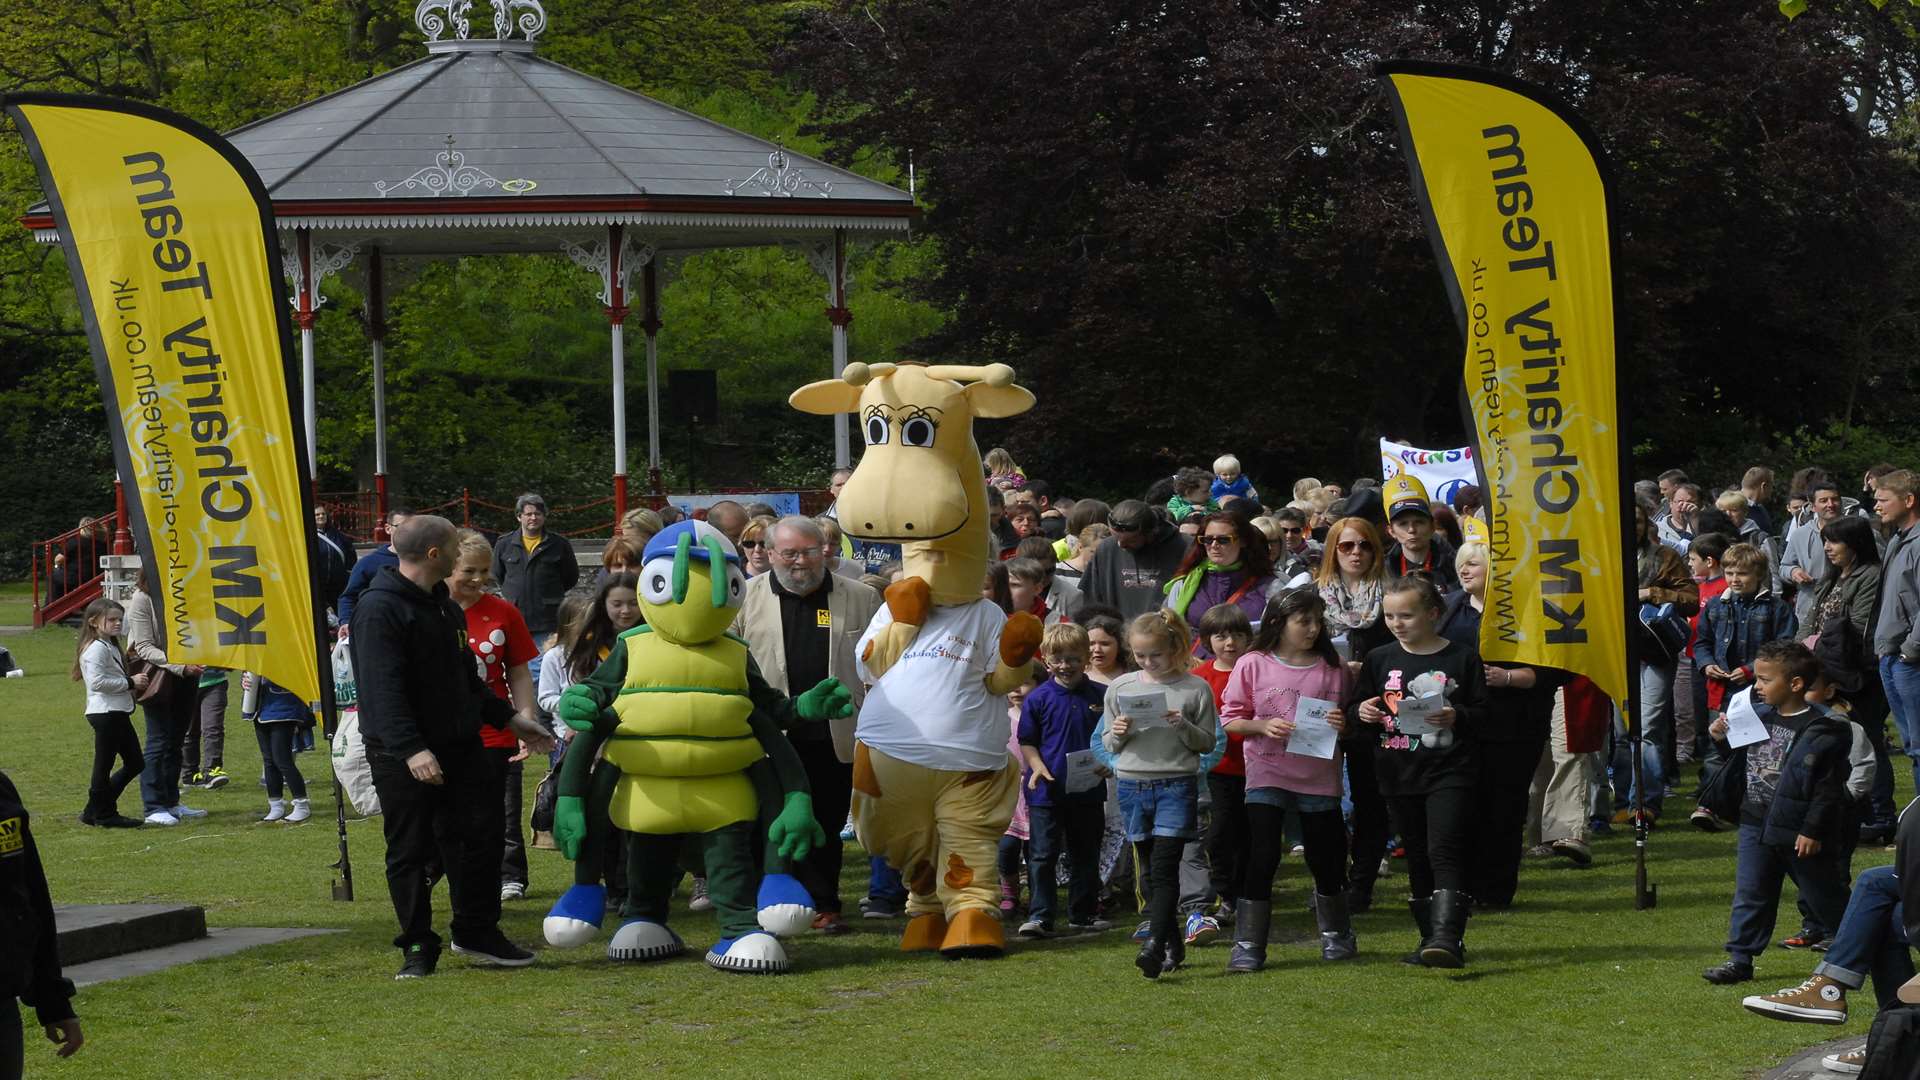 Buster's Big Bash - including the record breaking walking bus through Canterbury City Centre - will be once again be held at Dane John Gardens.